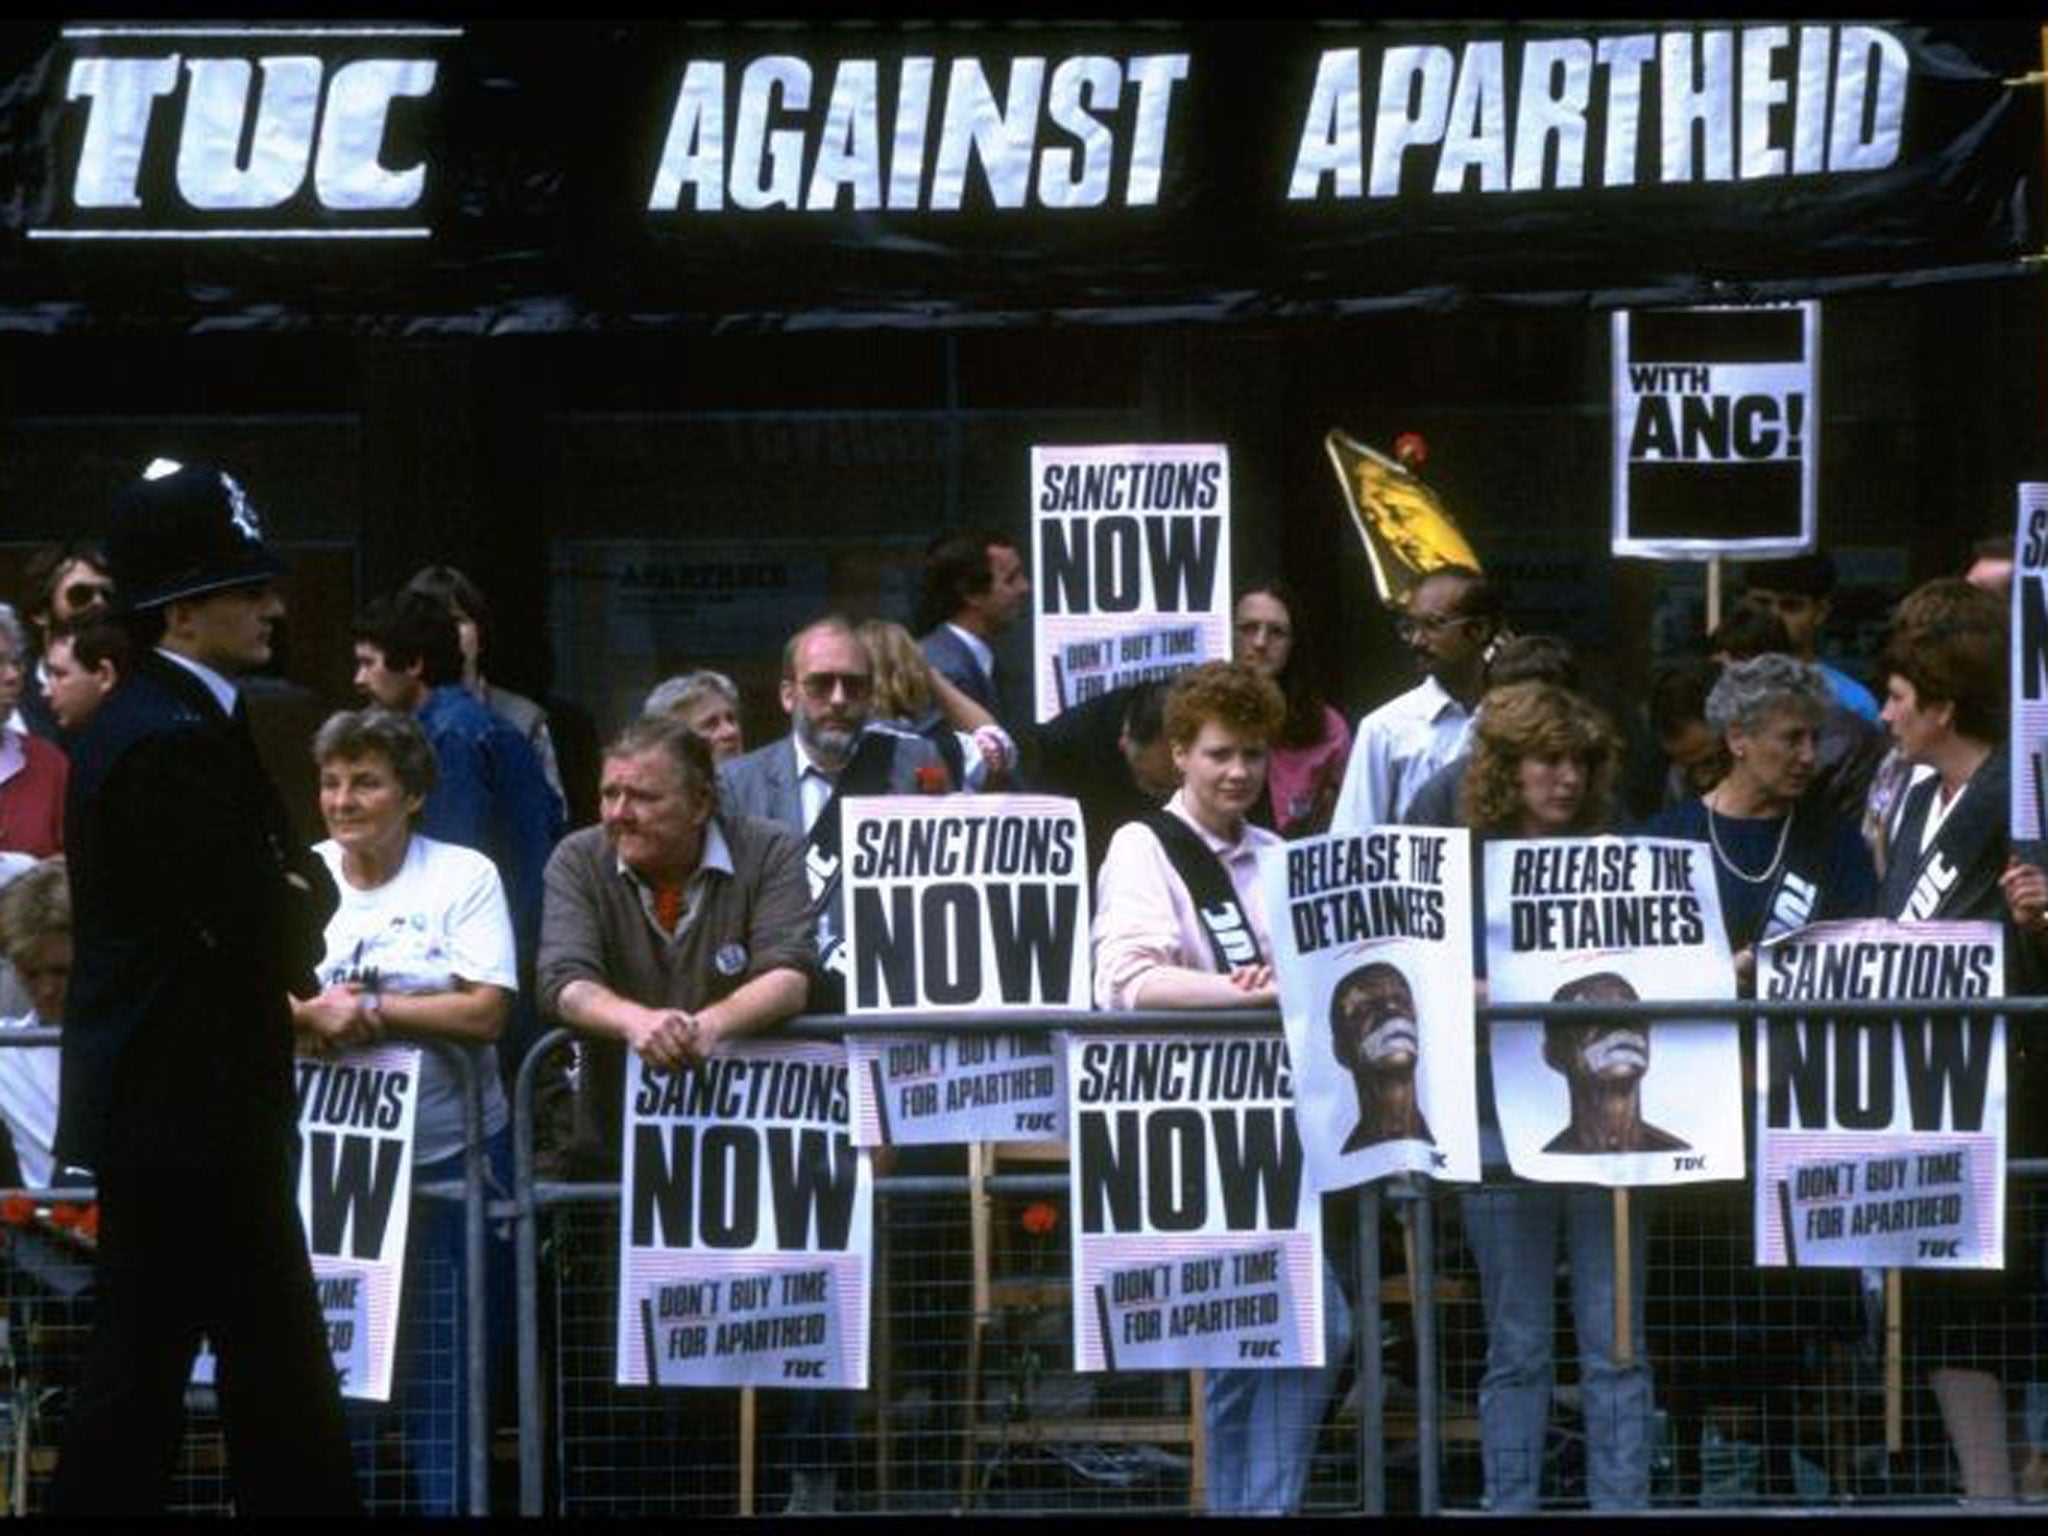 London 1986: Protesters call for sanctions against apartheid